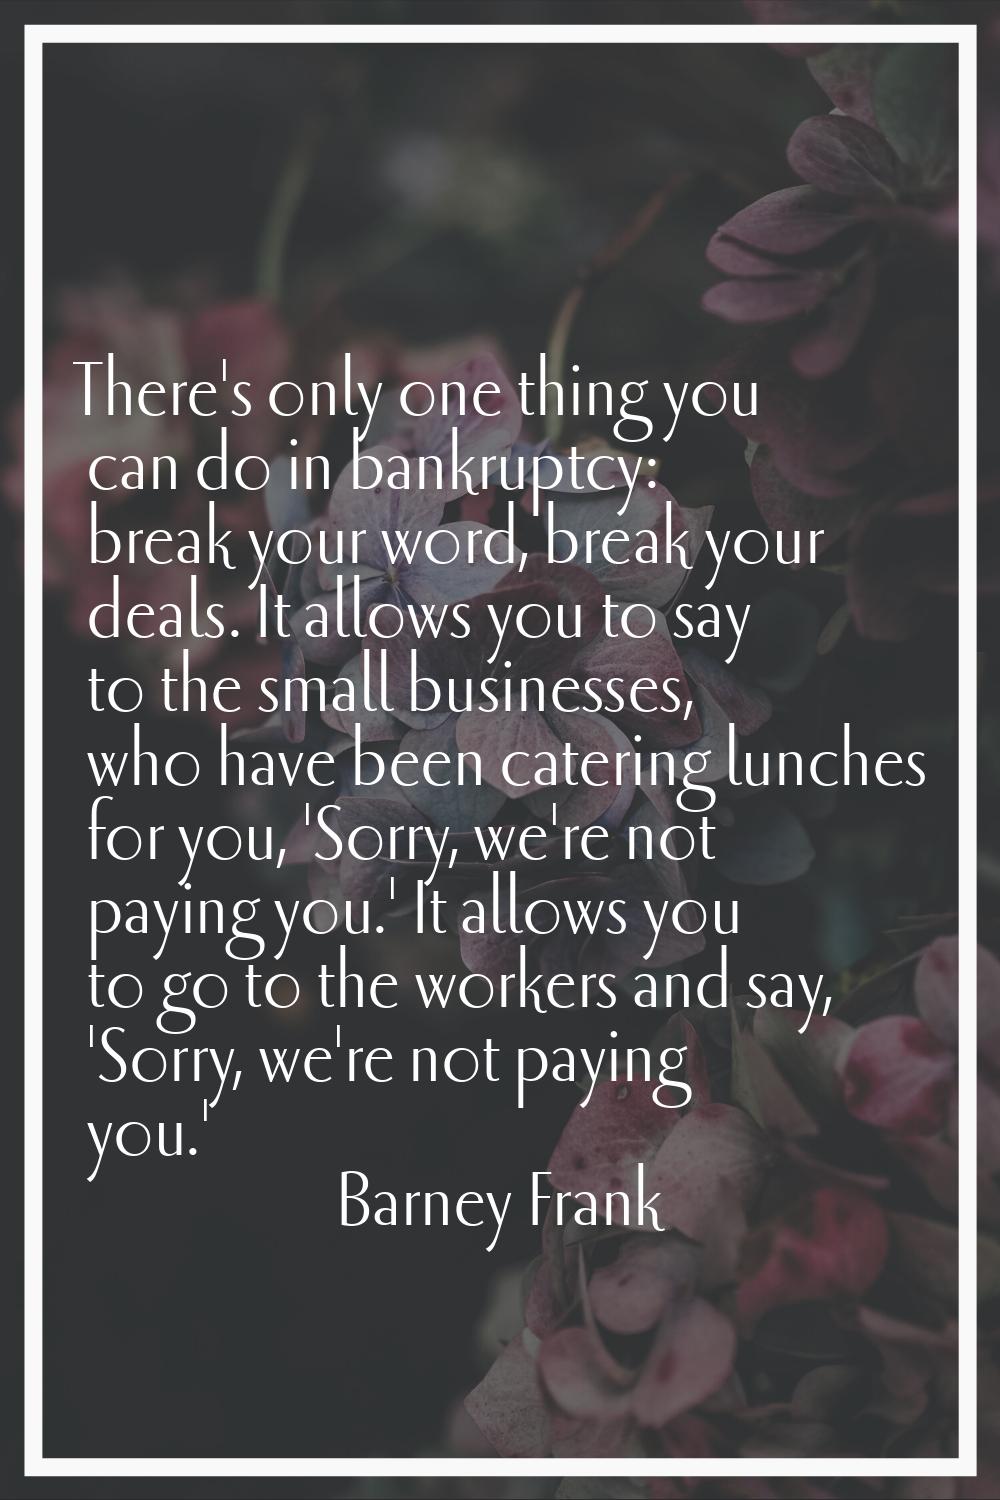 There's only one thing you can do in bankruptcy: break your word, break your deals. It allows you t